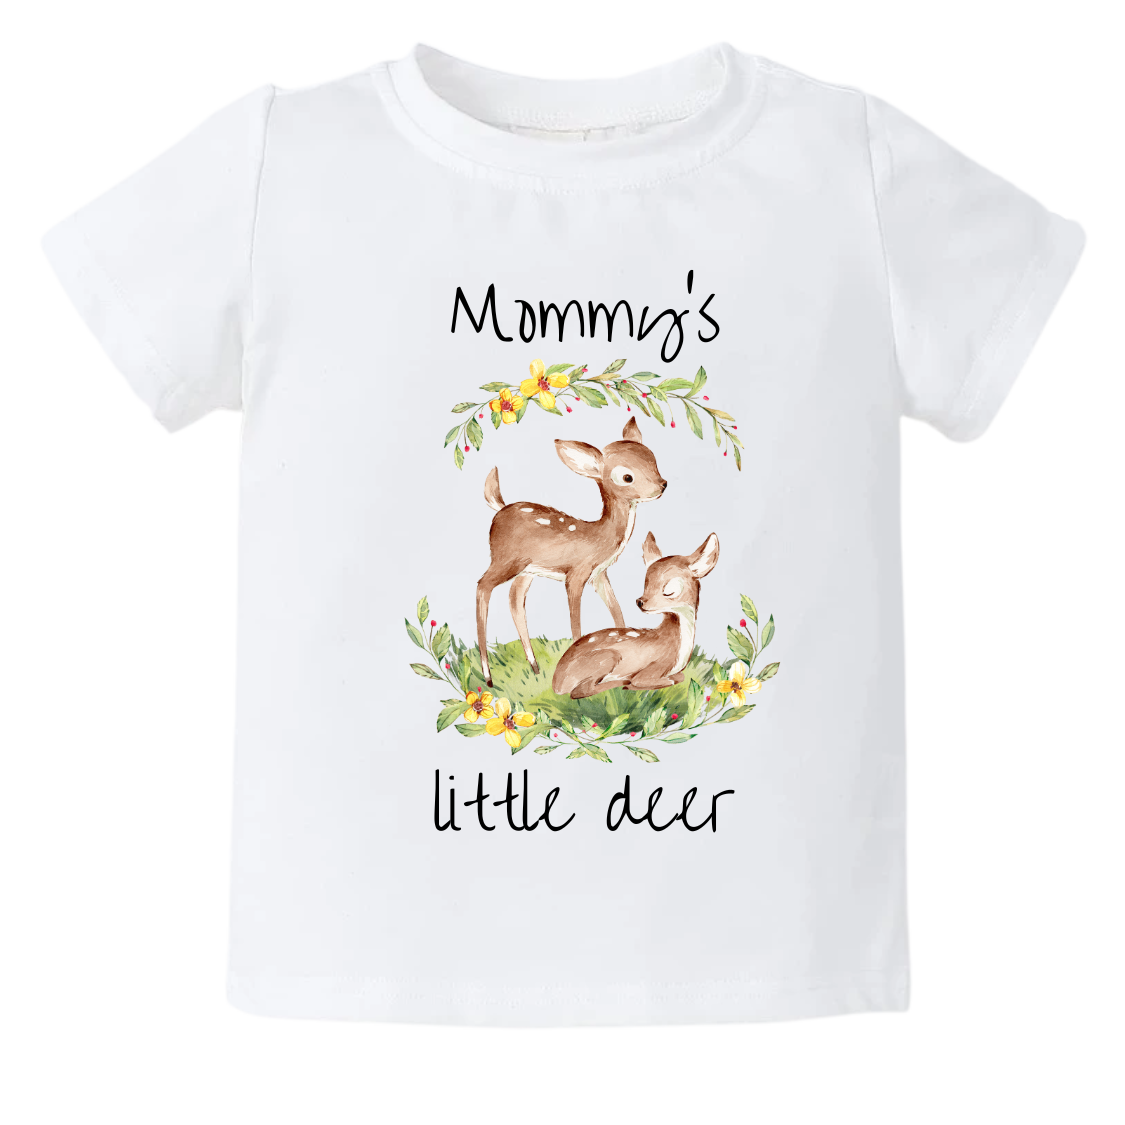 Kid's t-shirt with a cute printed design of a Parent and Kid Deer, customizable with the text 'Mommy's Little Deer'